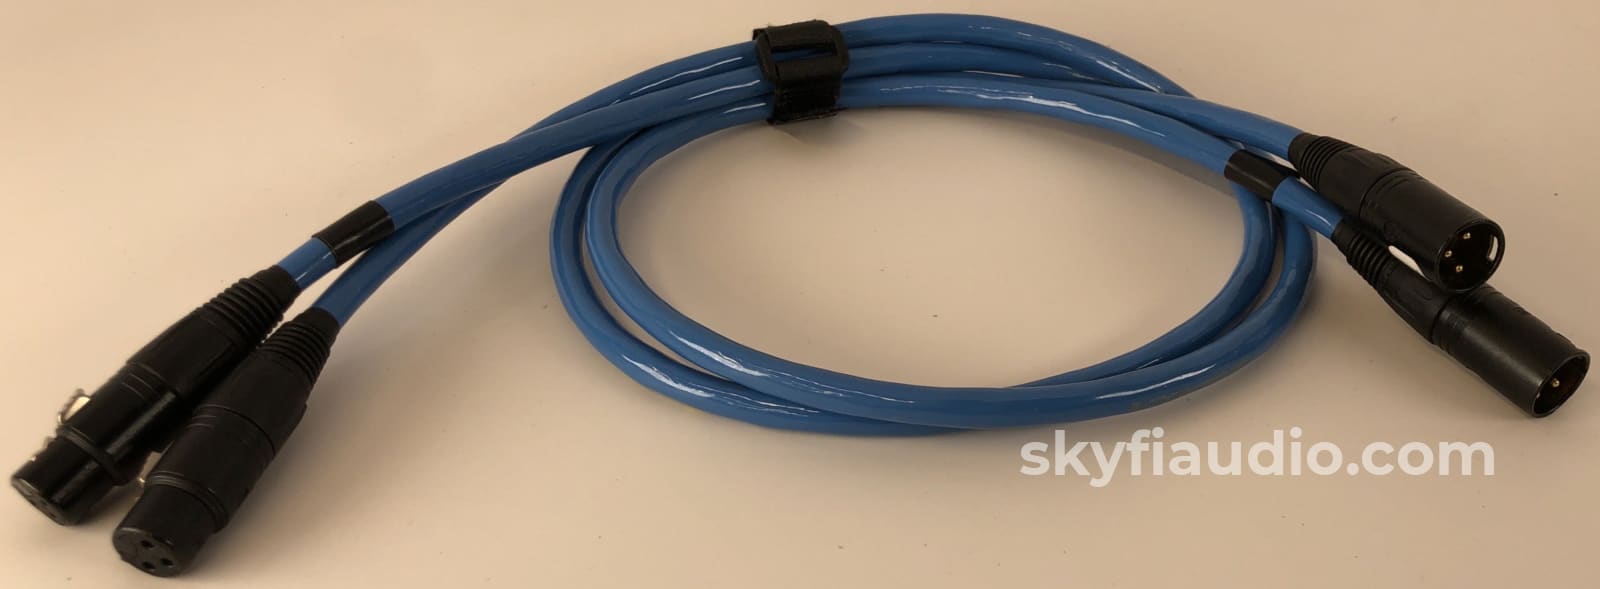 Siltech Cables - Hf-9 G3 Series- Digital Audio Aes/Ebu (Xlr Connector) Cable 1M